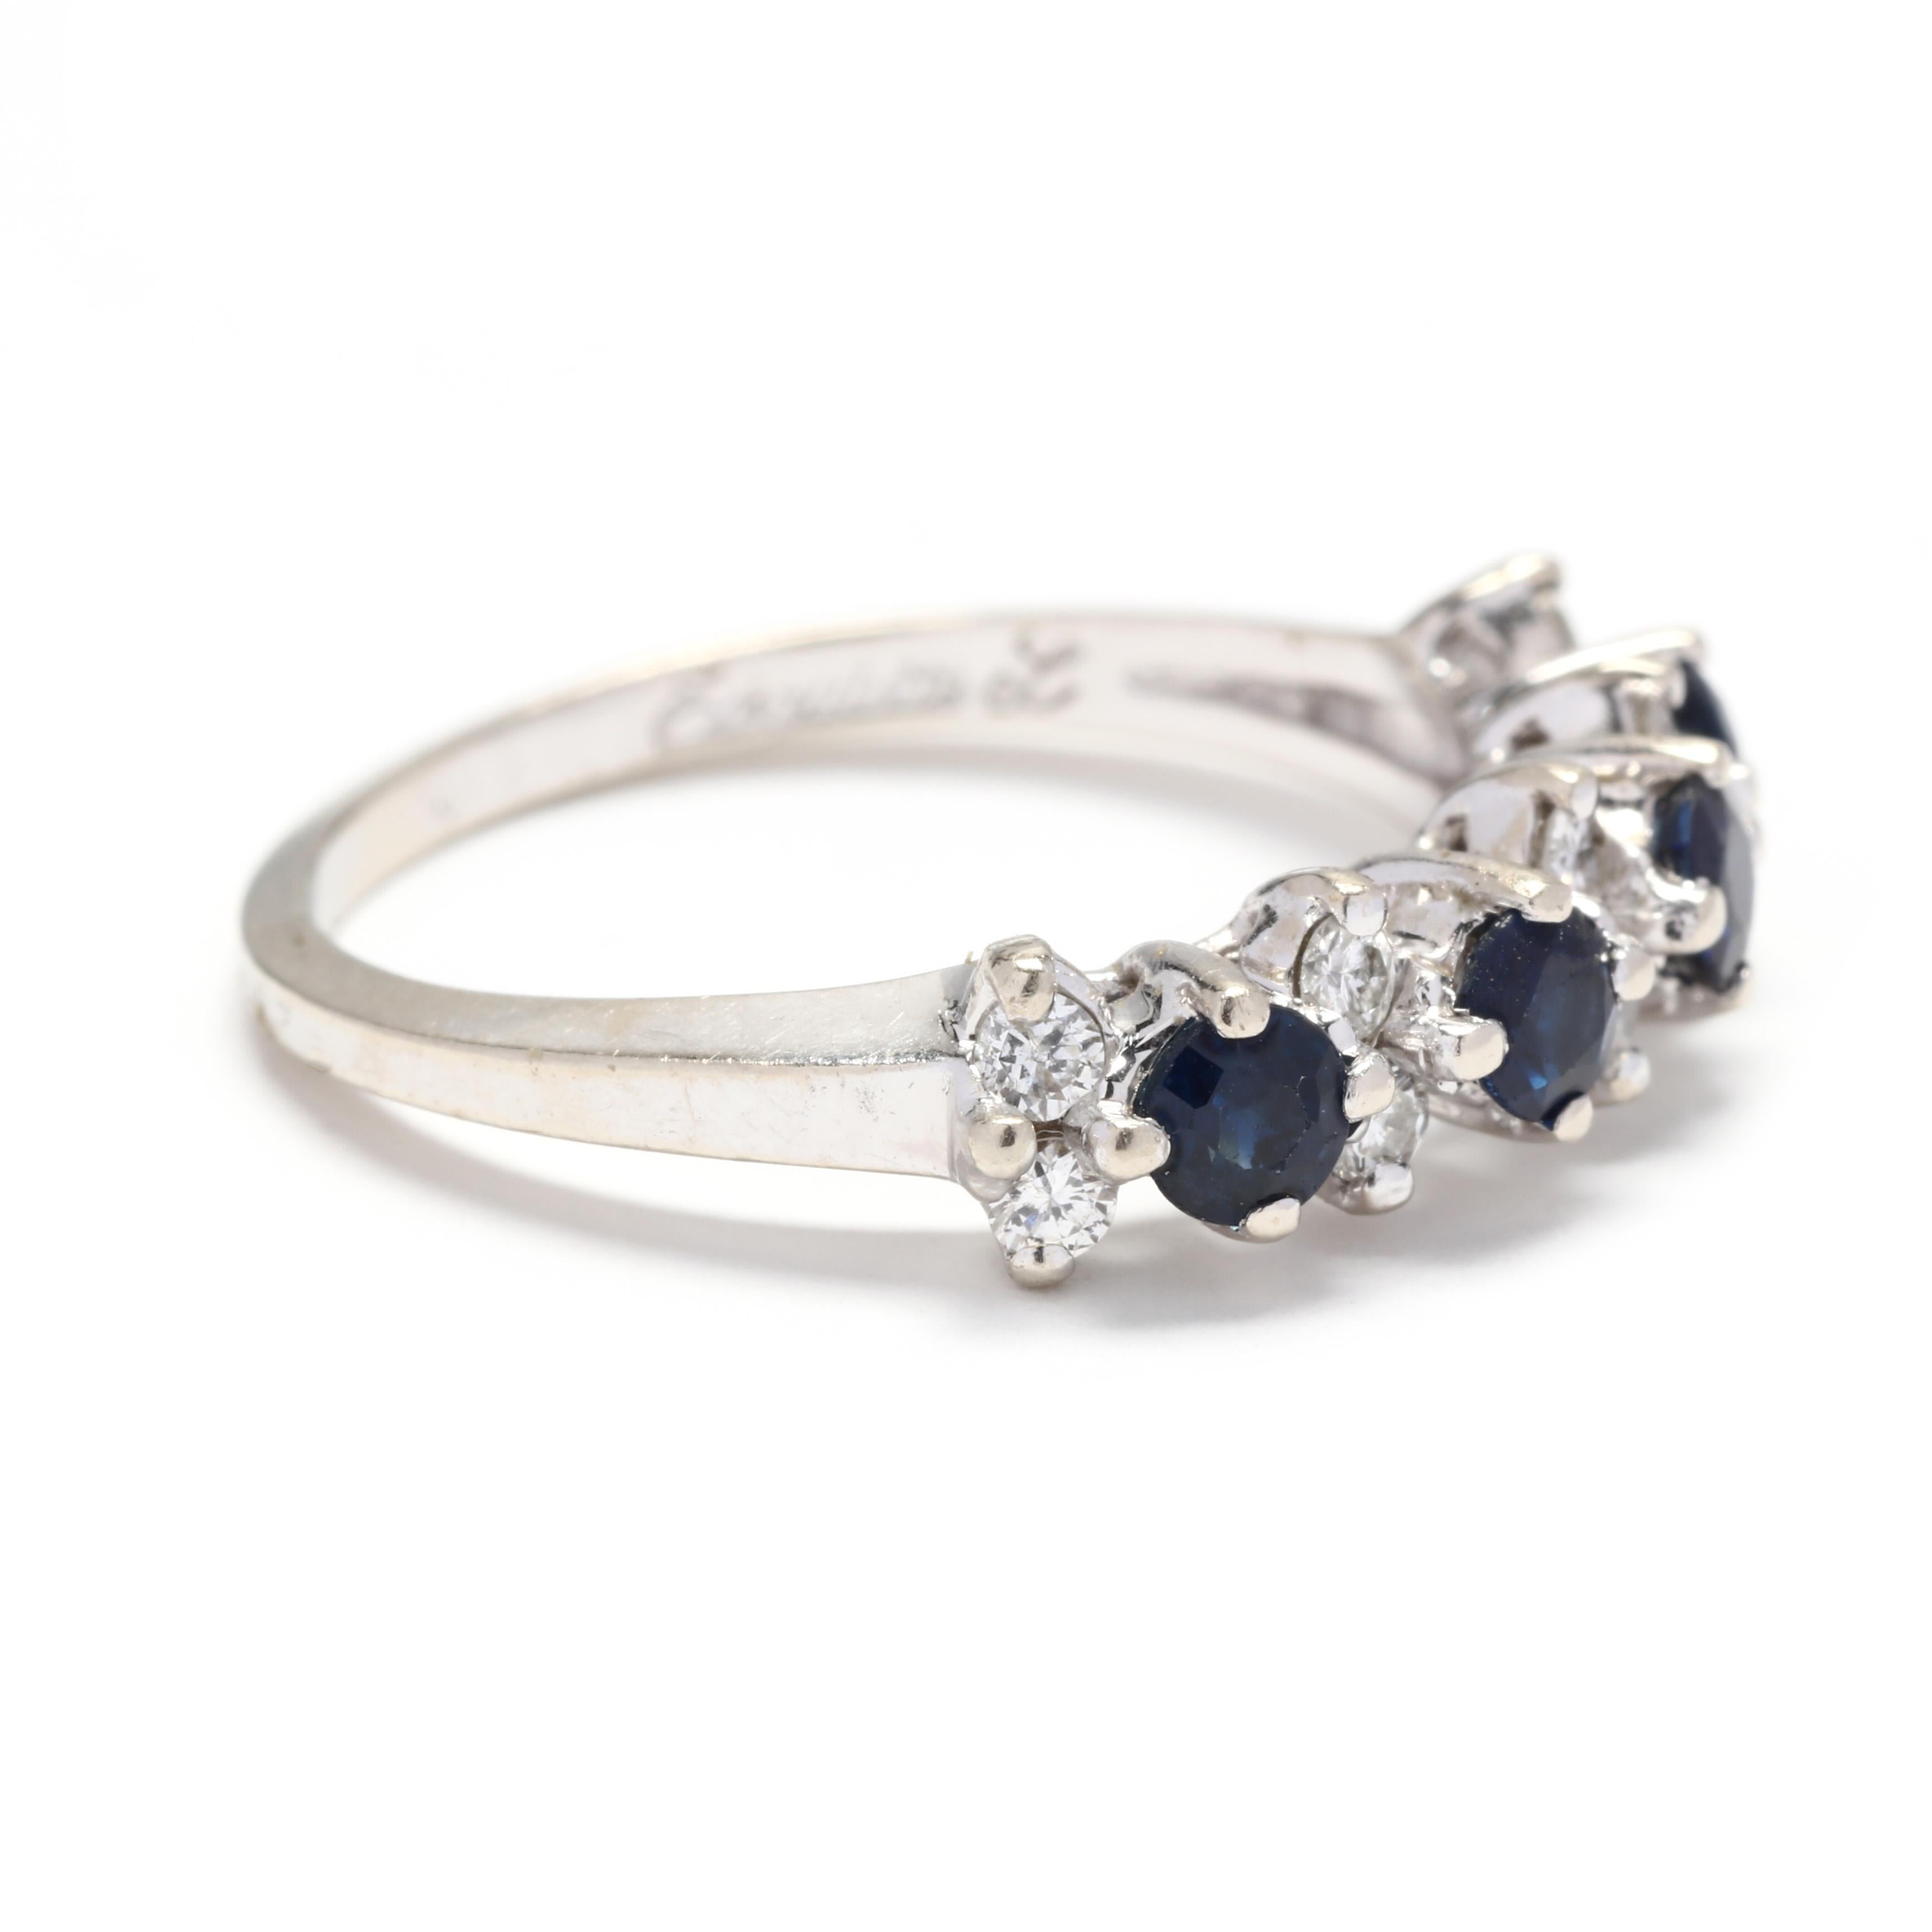 A 14 karat white gold, sapphire and diamond stackable band ring. This ring features alternating round cut sapphires weighing approximately .64 total carats and full cut round diamonds weighing approximately .20 total carats, with a slightly tapered